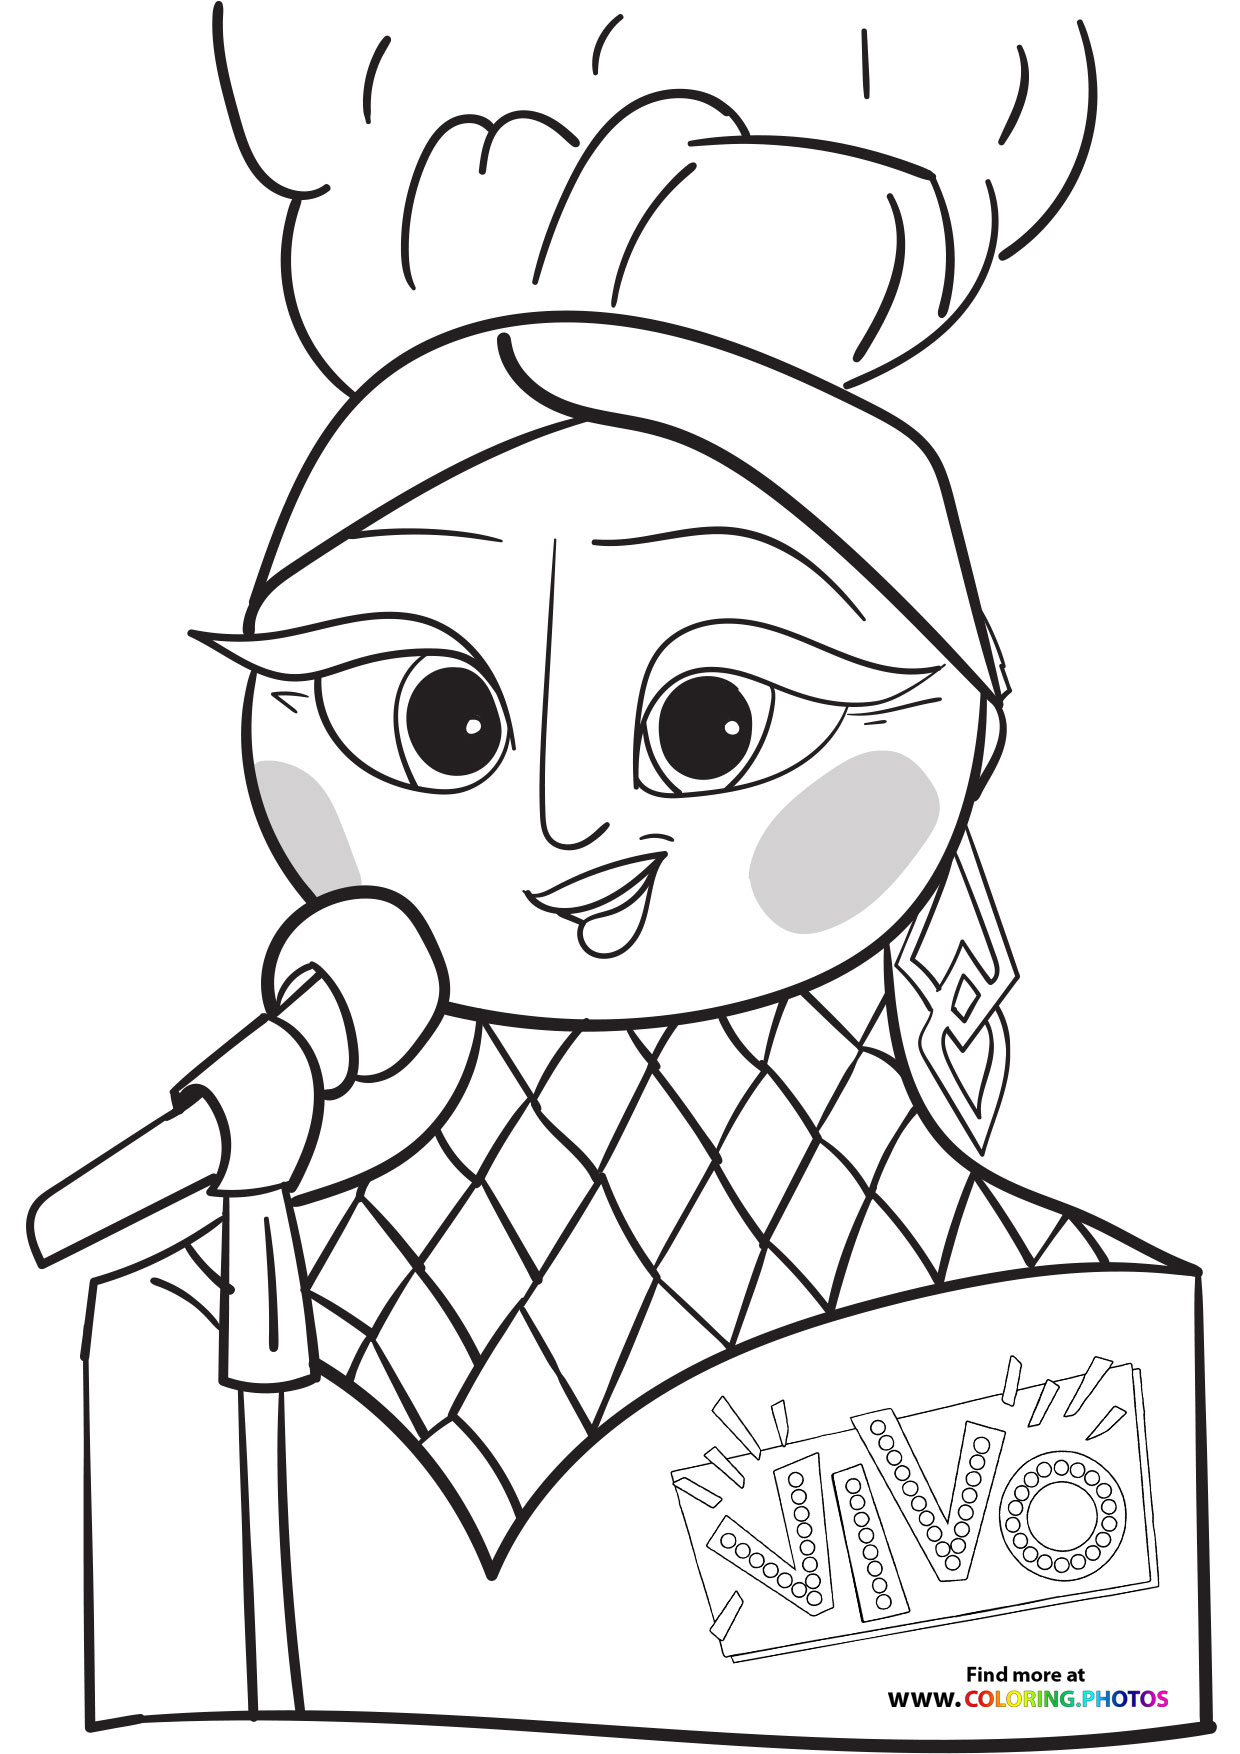 Stork carrying Vivo - Coloring Pages for kids